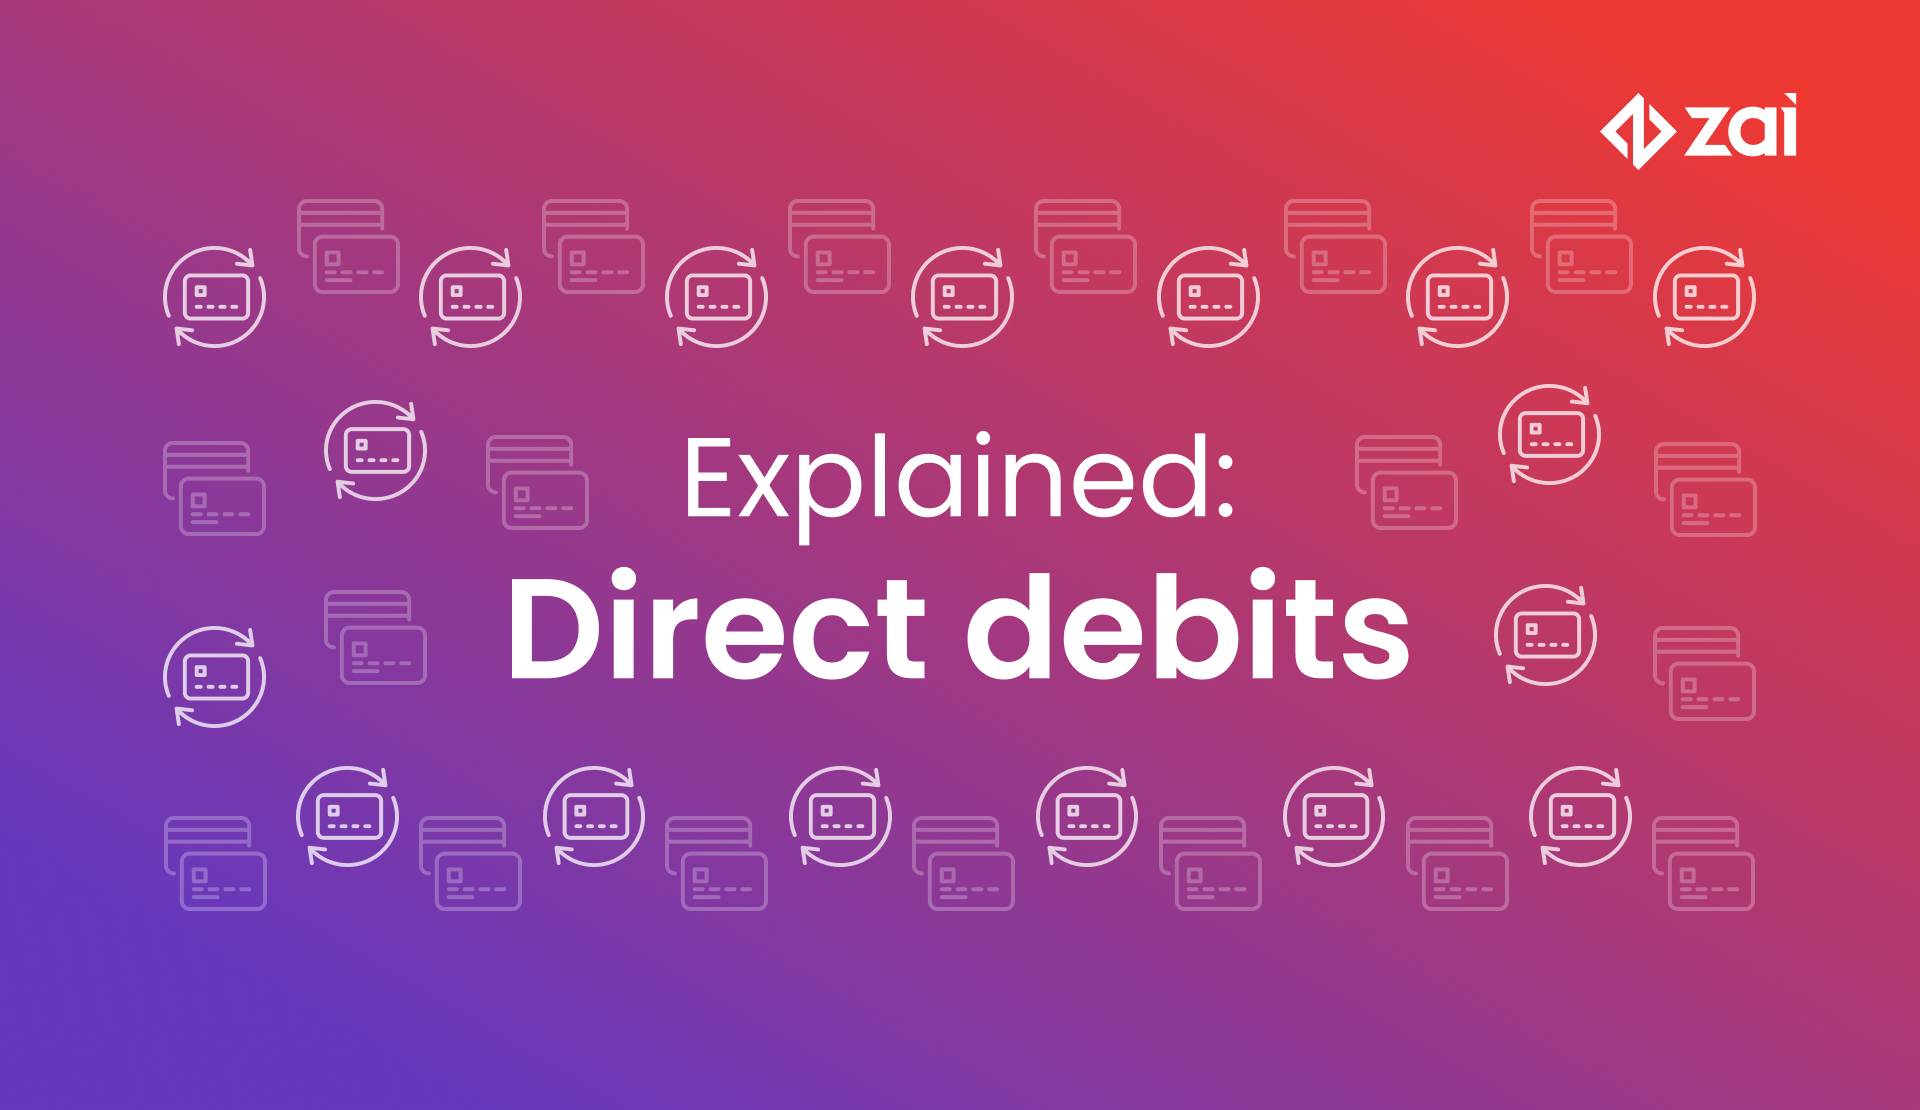 What is a direct debit?